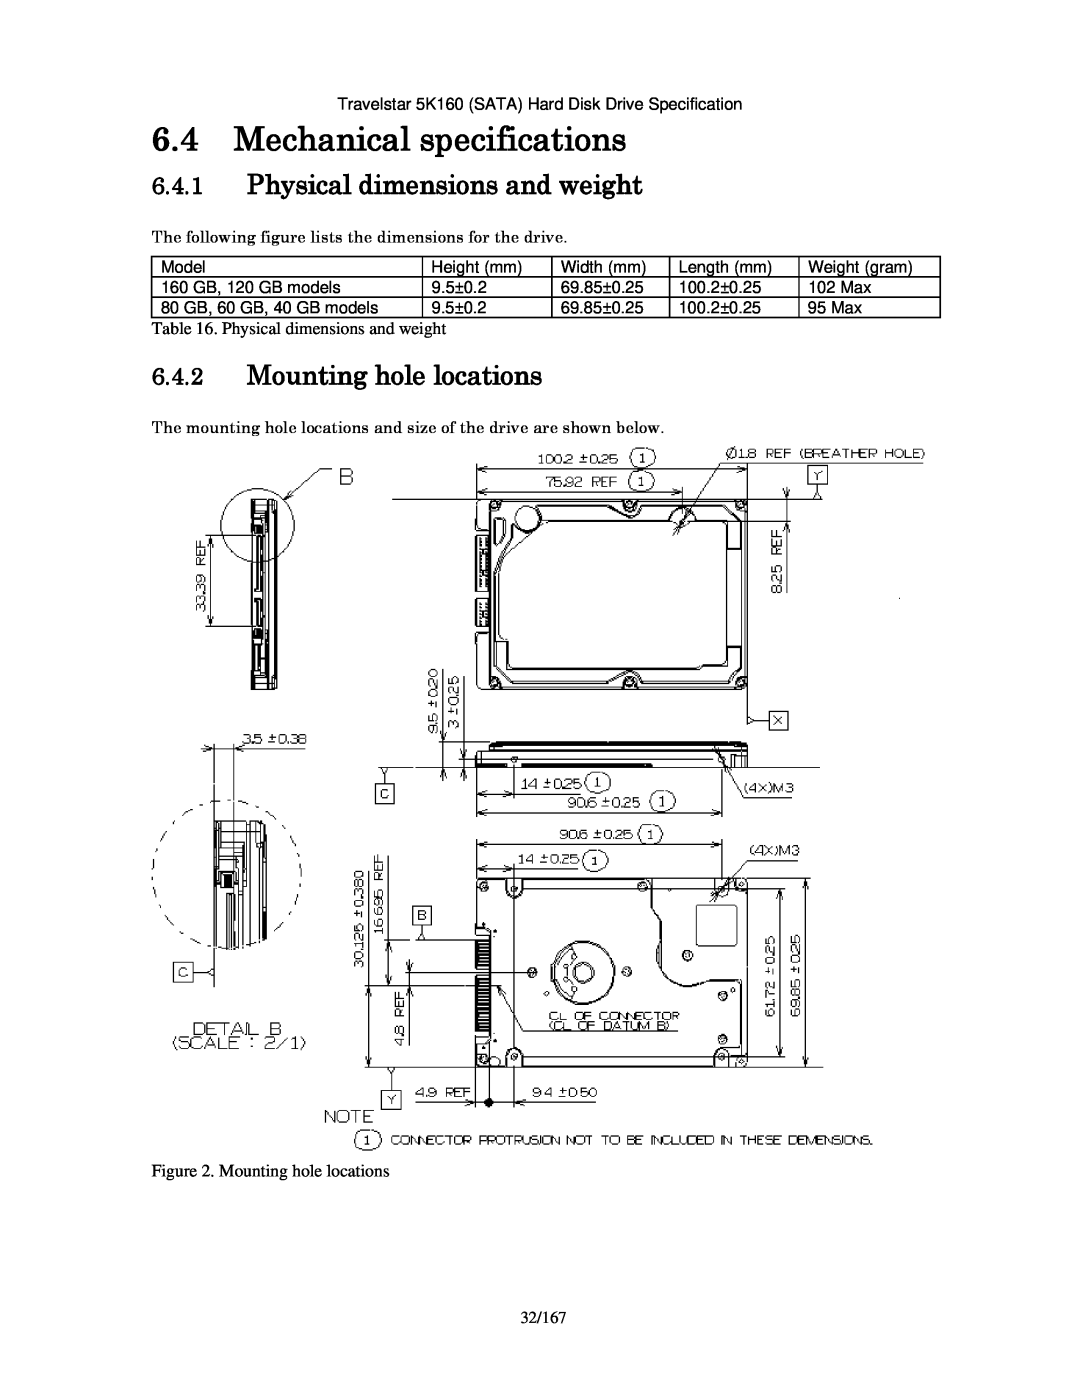 Hitachi HTS541616J9SA00 manual Mechanical specifications, Physical dimensions and weight, Mounting hole locations 